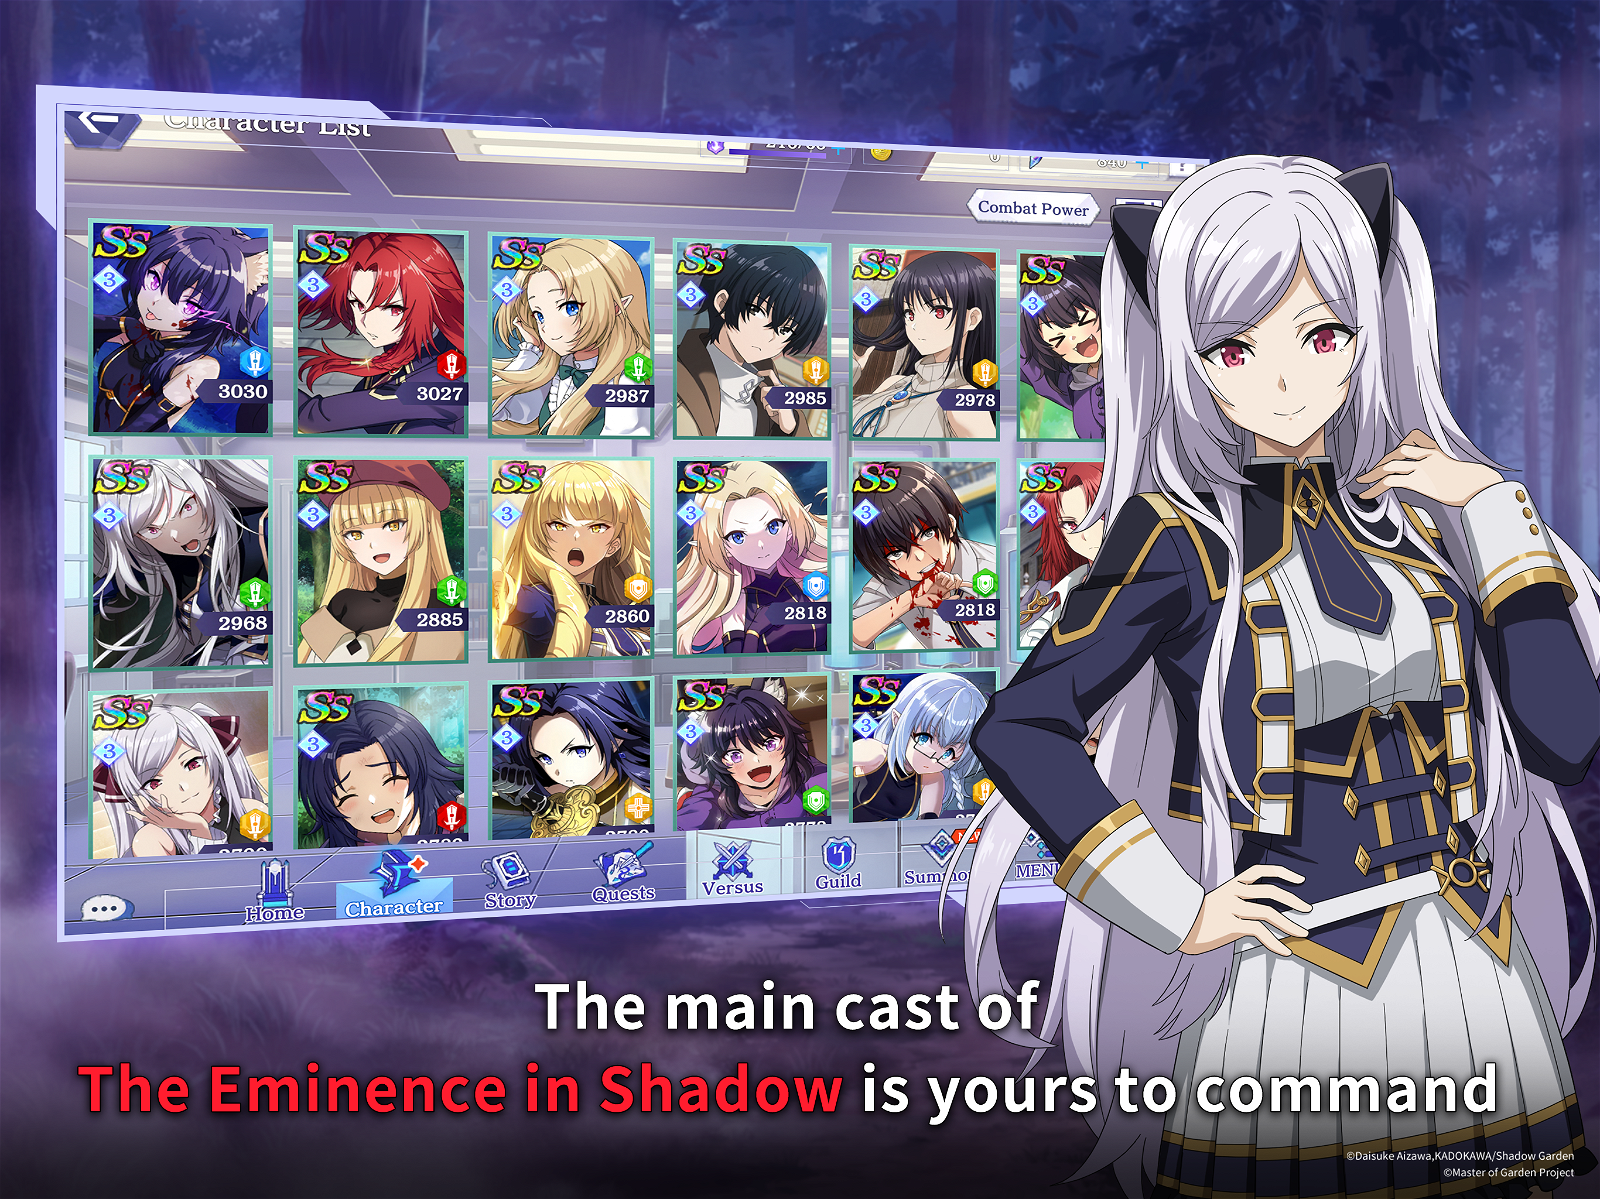 CRUNCHYROLL GAMES LAUNCHES ANIME RPG THE EMINENCE IN SHADOW